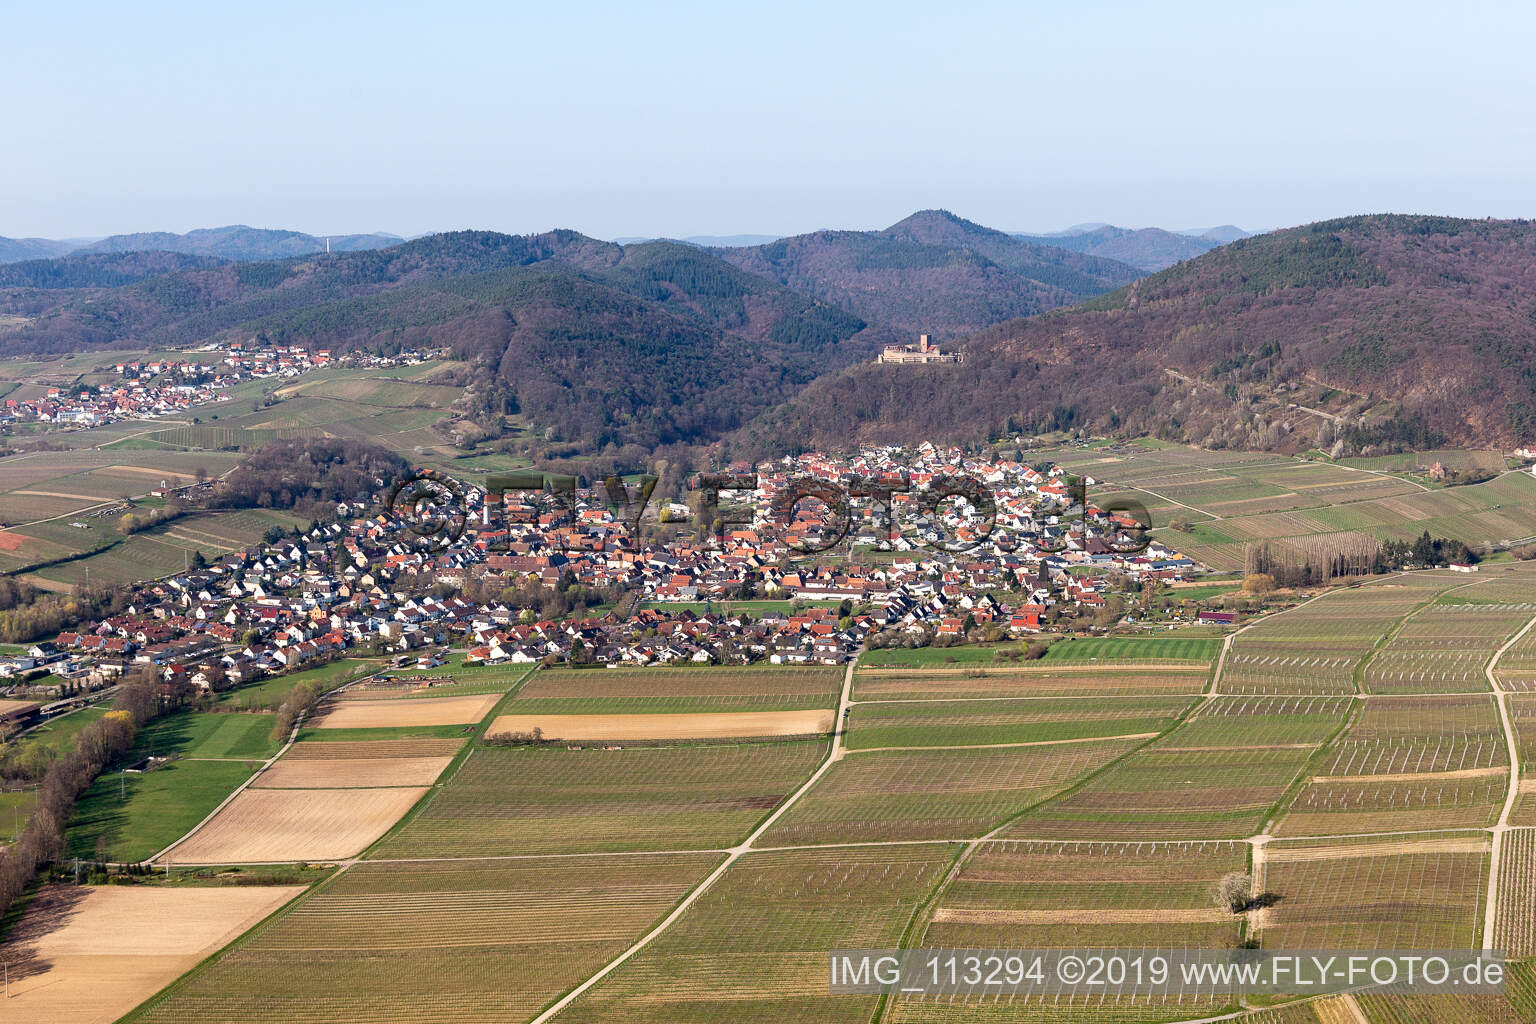 Klingenmünster in the state Rhineland-Palatinate, Germany seen from above